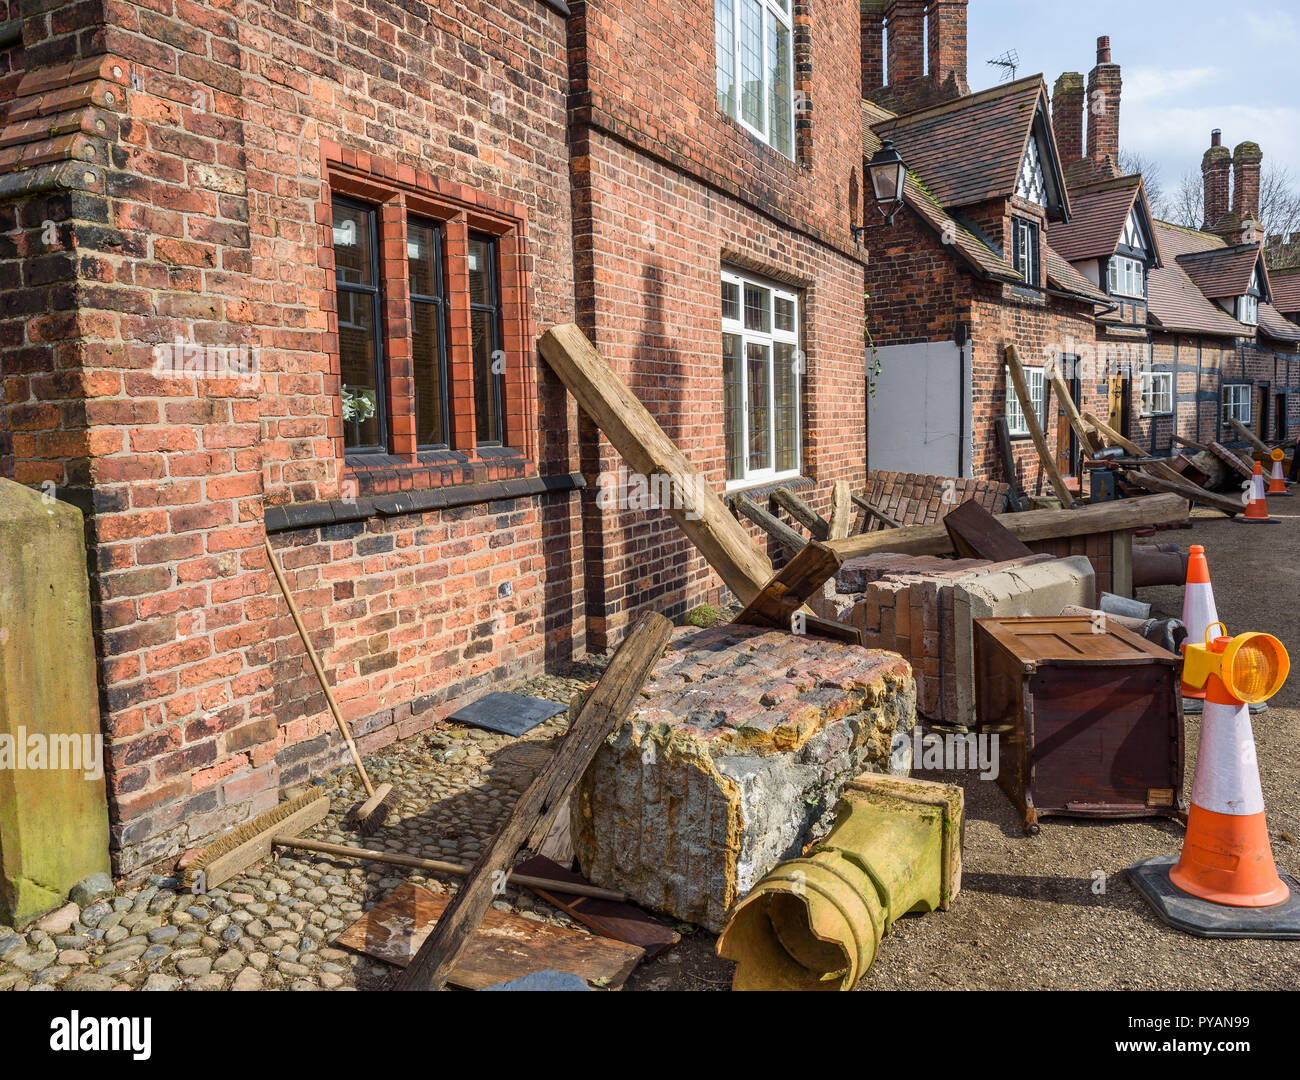 Props and debris litter alongside cottages for  the new BBC drama 'War Of The Worlds' by HG Wells,filmed at Great Budworth village, Cheshire, April 20 Stock Photo